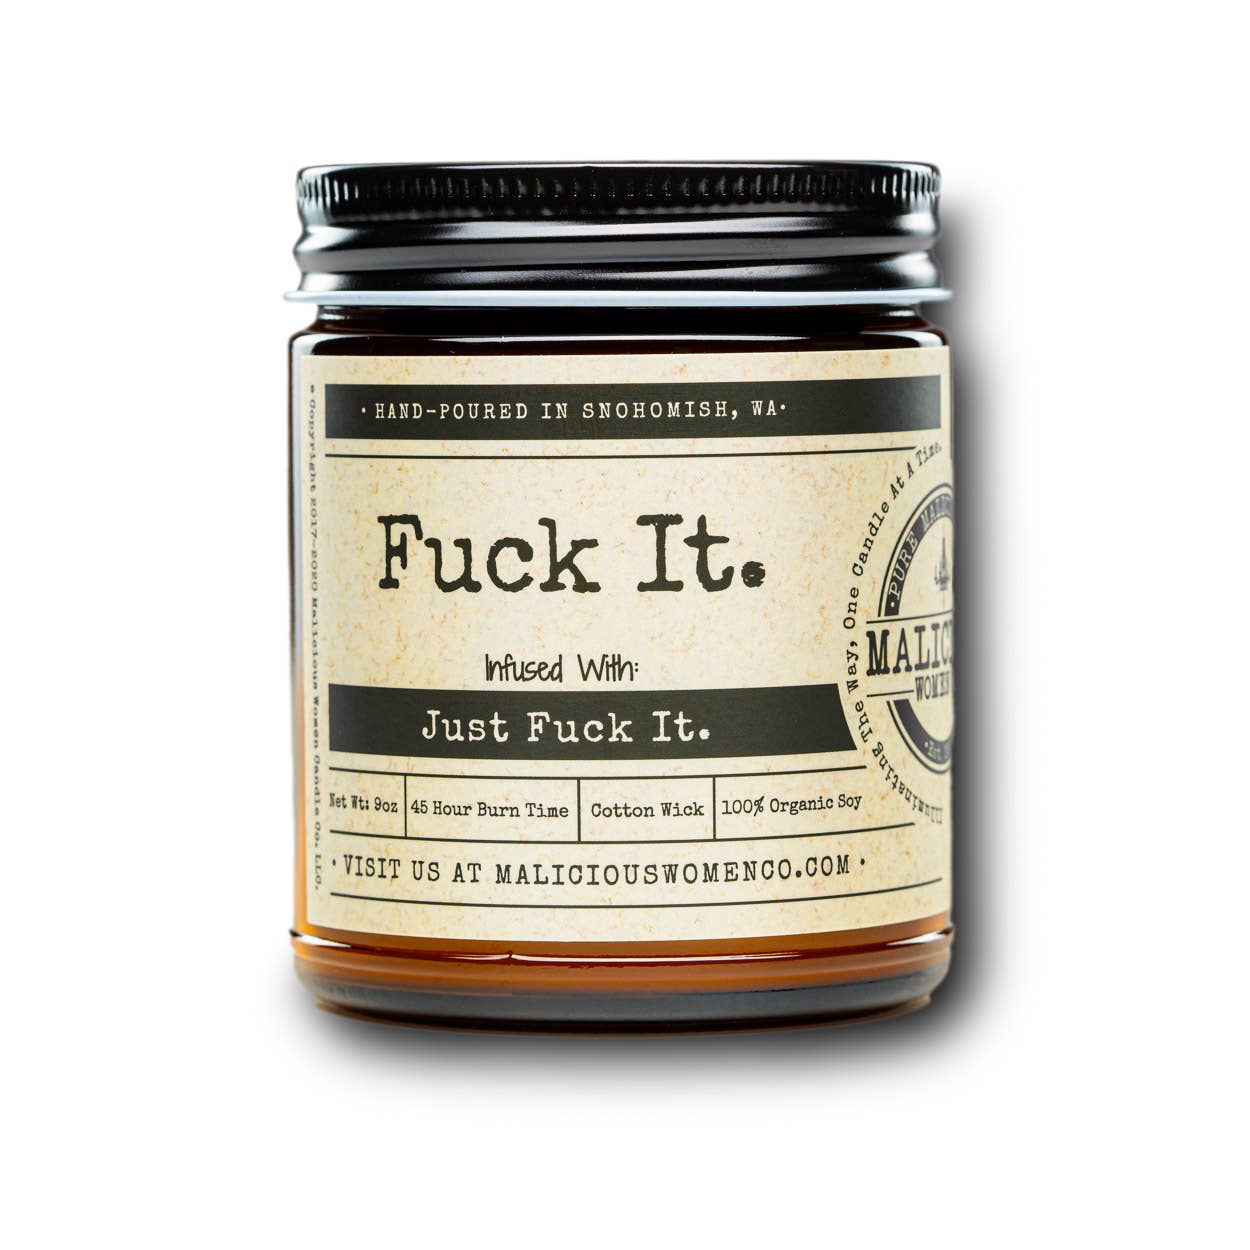 Fuck It. - Infused with Just Fuck It - Malicious Women Candle Co